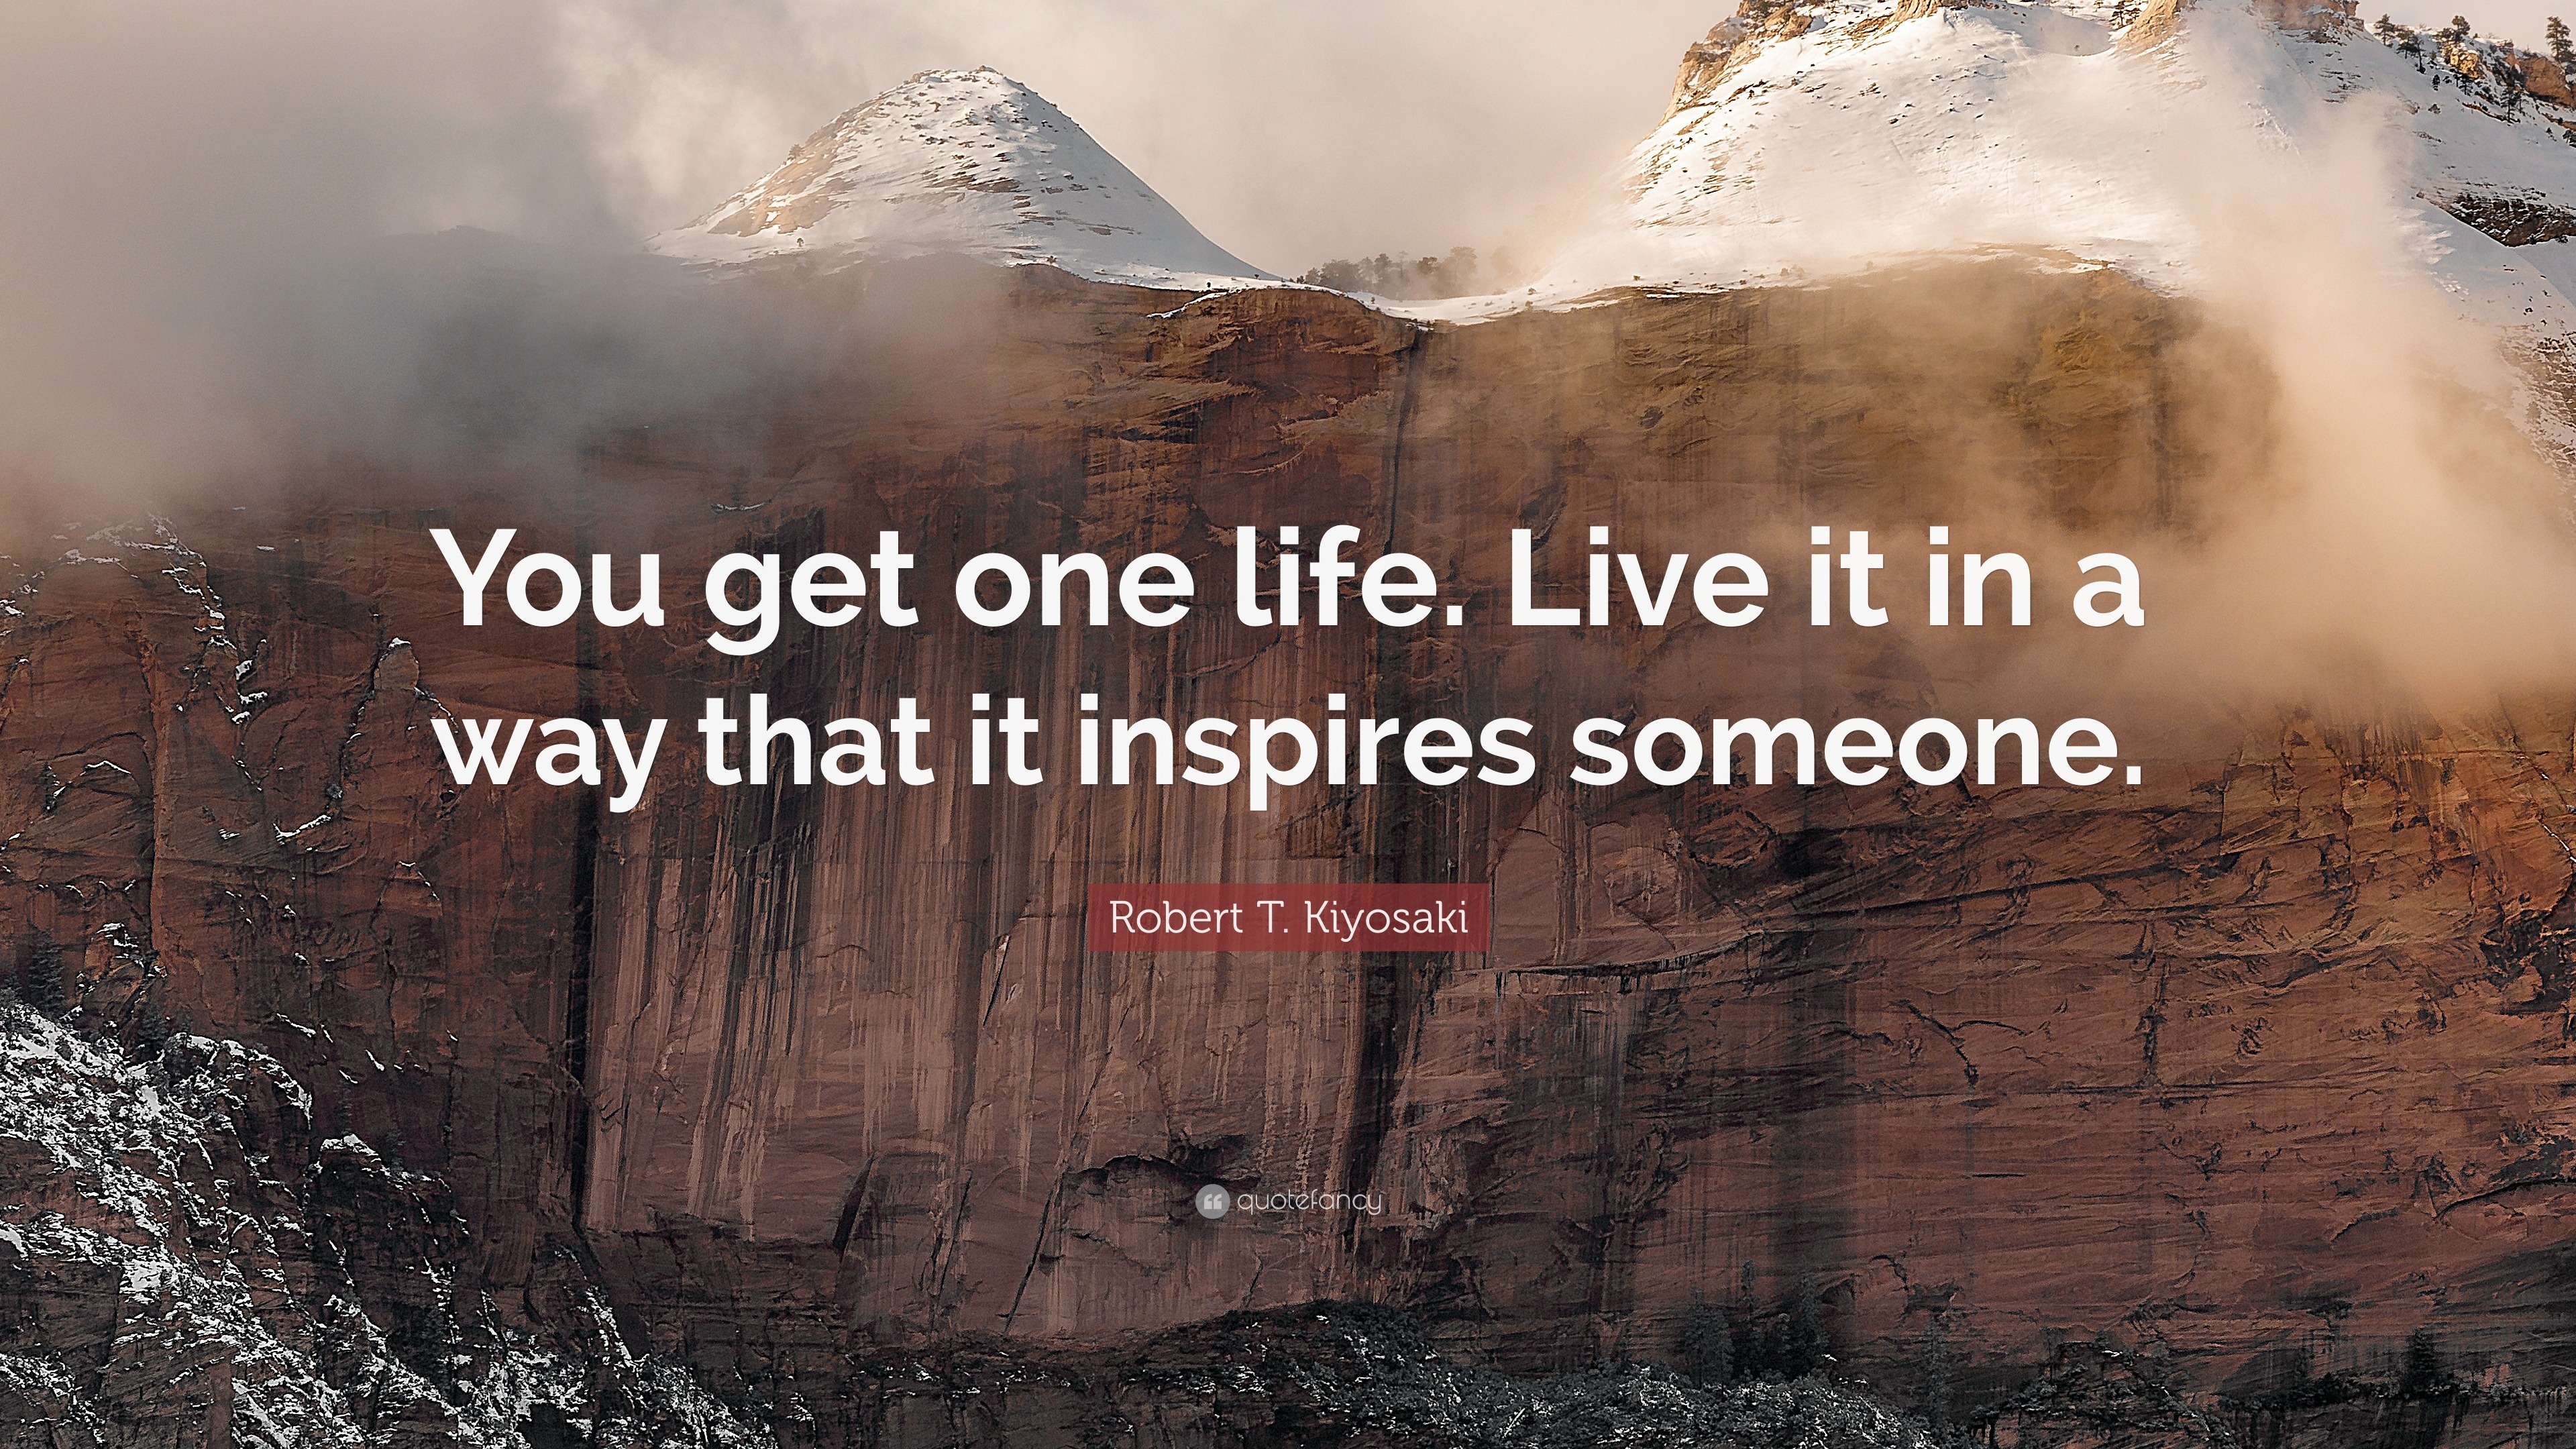 Robert T Kiyosaki Quote “You one life Live it in a